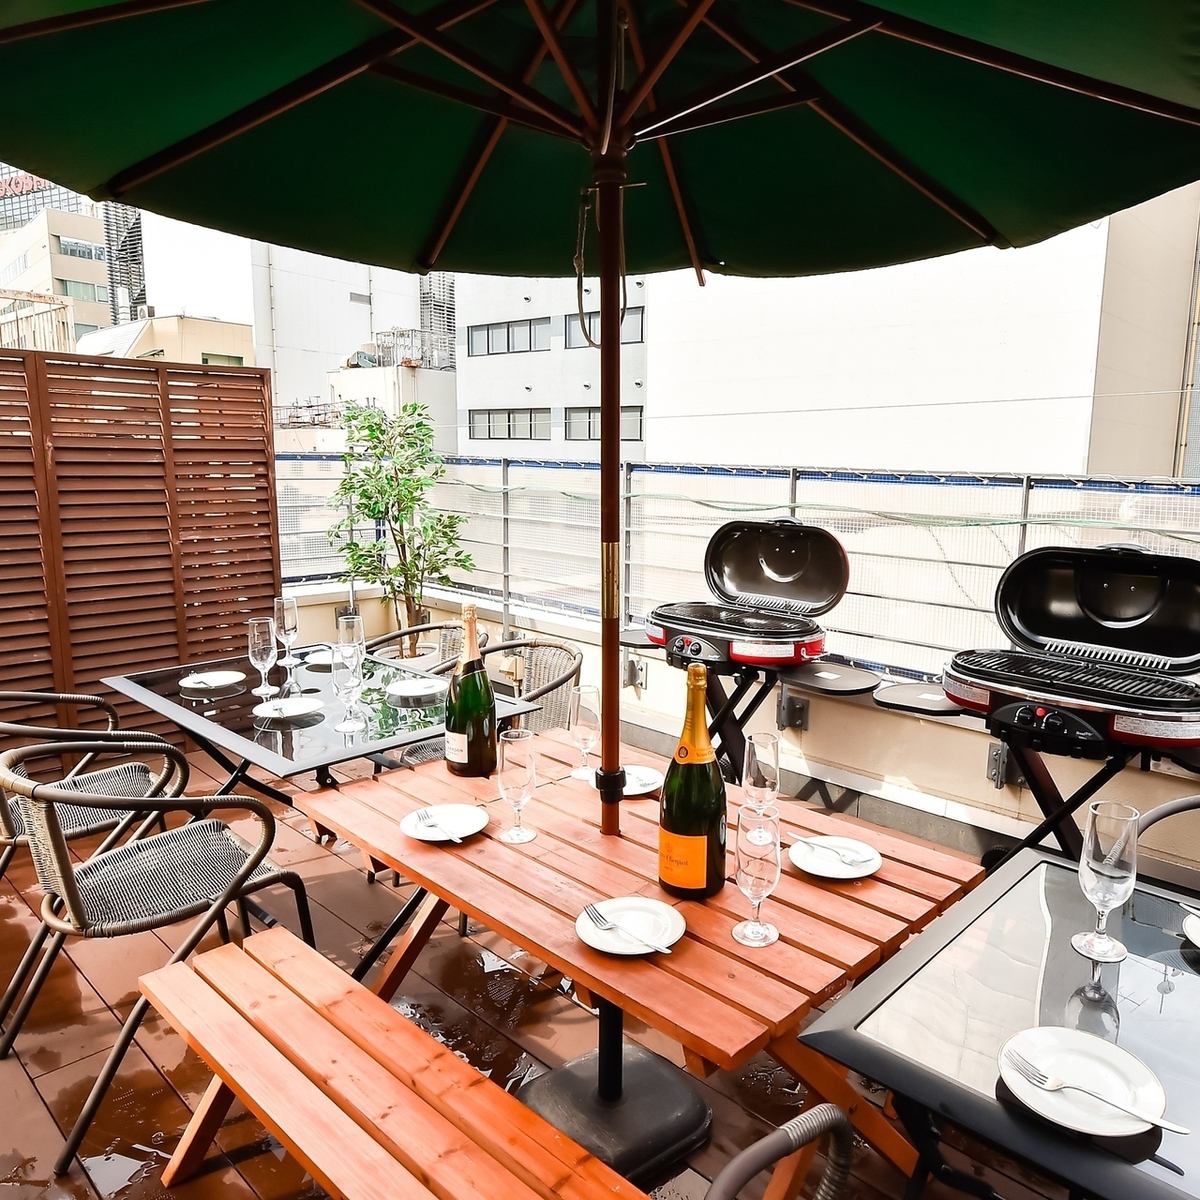 Enjoy BBQ on the terrace overlooking the night view!